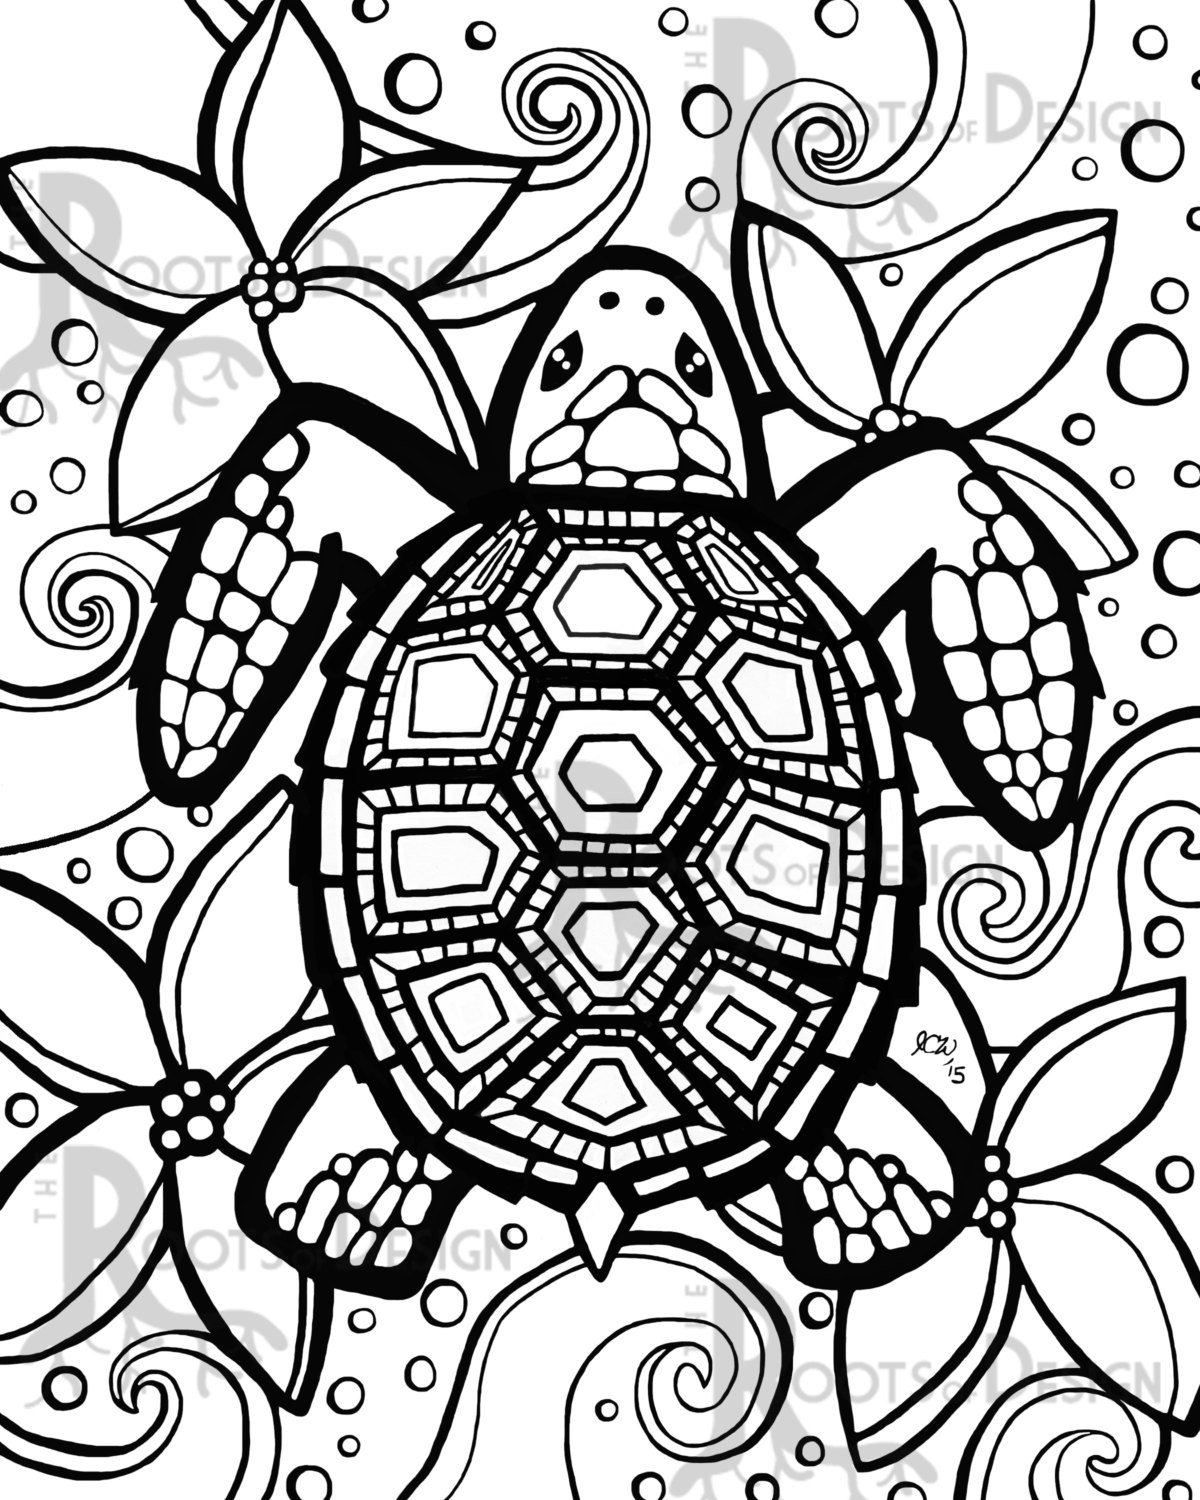 Free Stress Relief Coloring Pages at GetDrawings | Free download